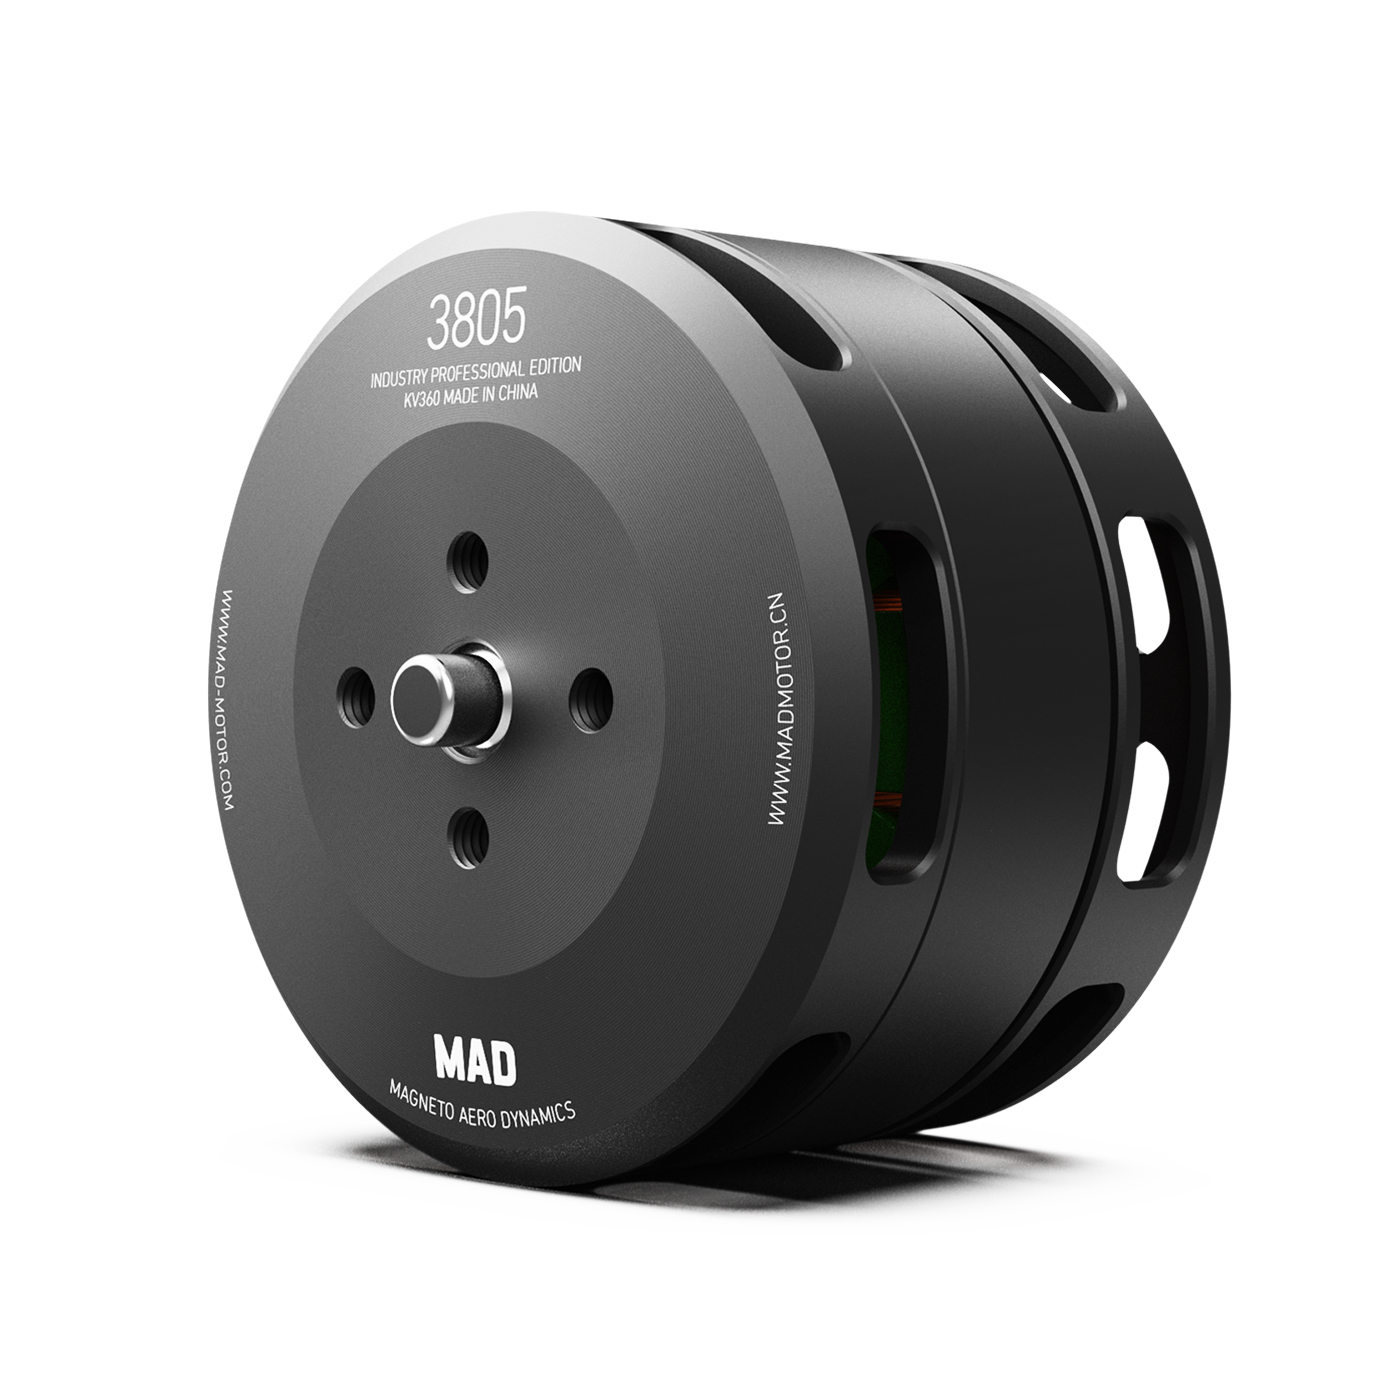 MAD 3508 IPE  brushless motor for the long-range inspection drone mapping drone surveying drone quadcopter hexcopter mulitirotor